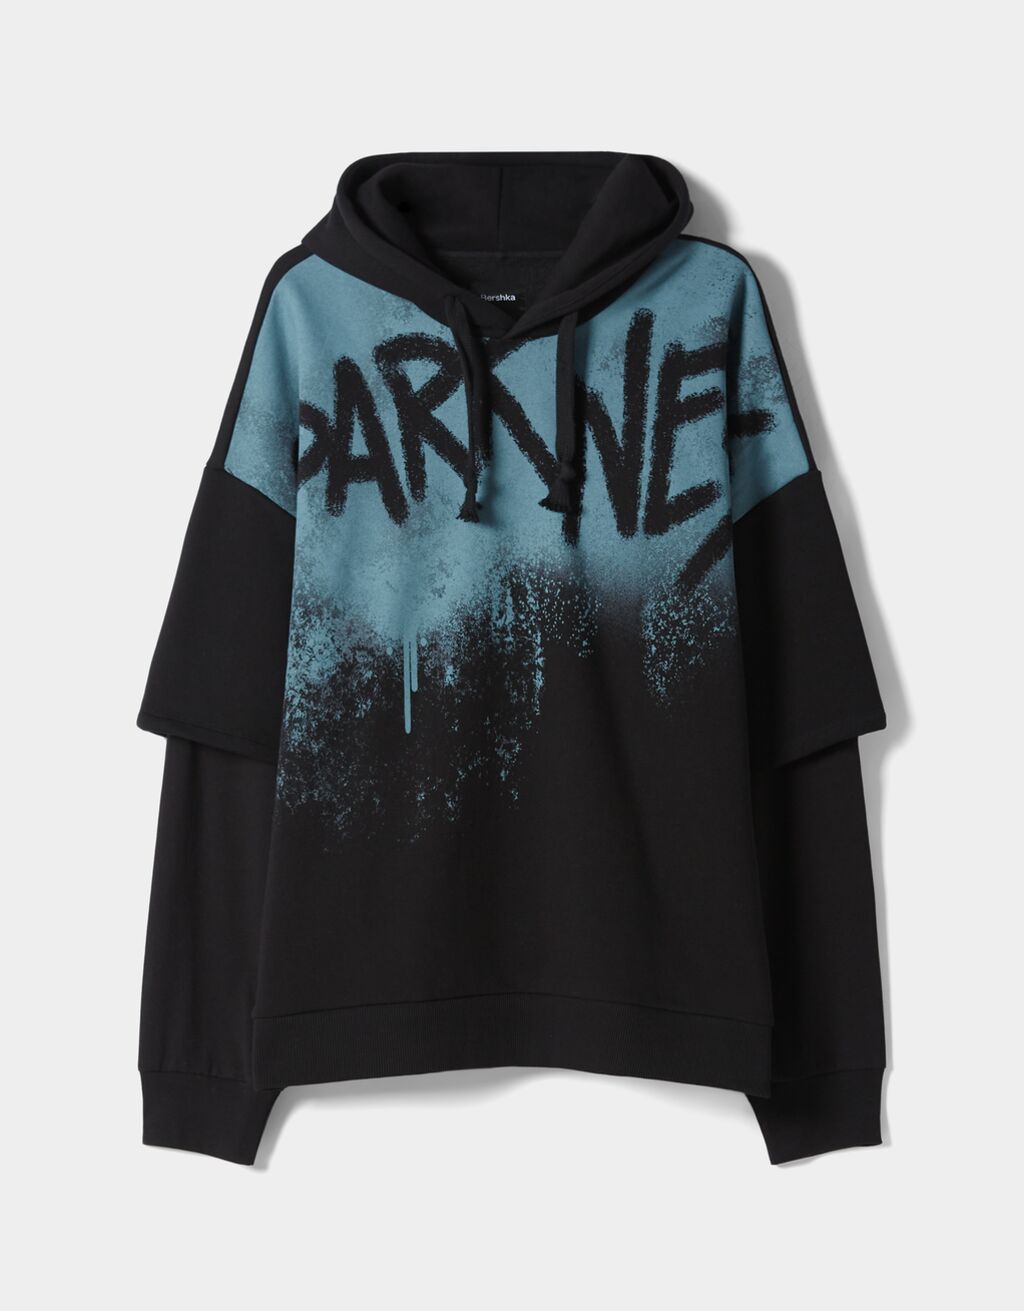 Printed oversize hoodie with double sleeves